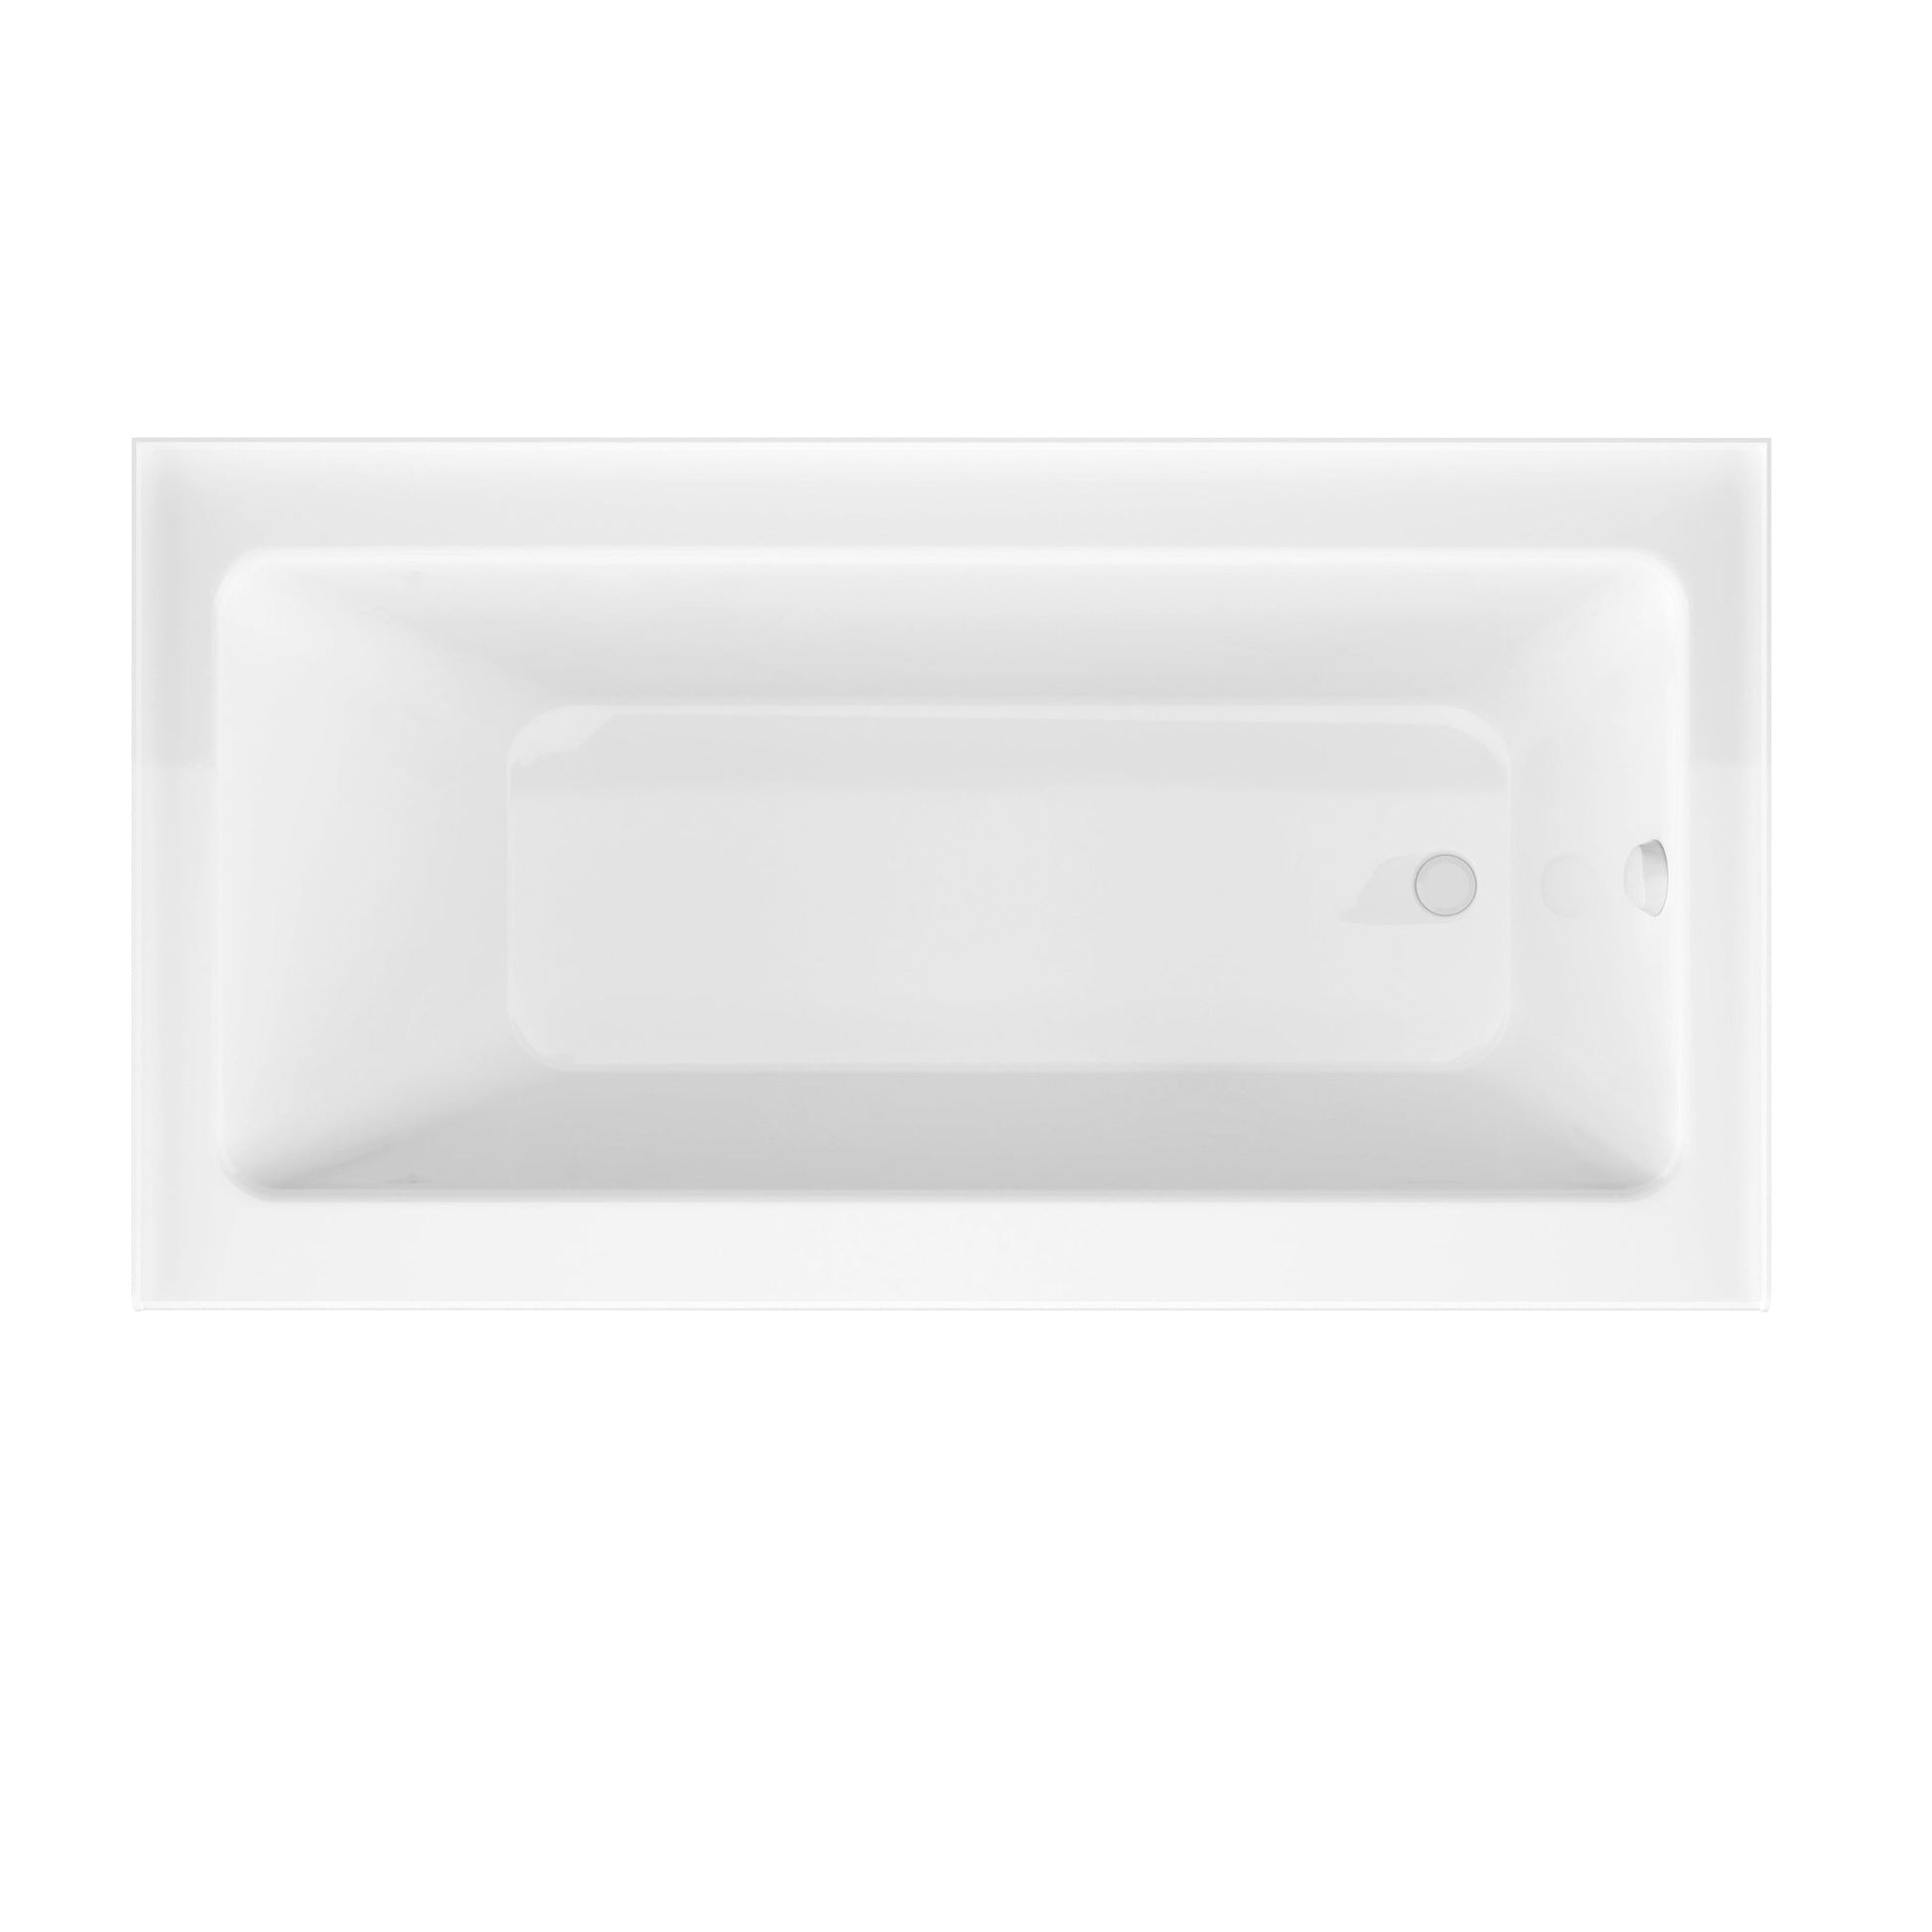 ANZZI Herald Series White "60 x 32" Alcove Right Drain Rectangular Bathtub With Built-In Flange and Frameless Polished Chrome Hinged Door